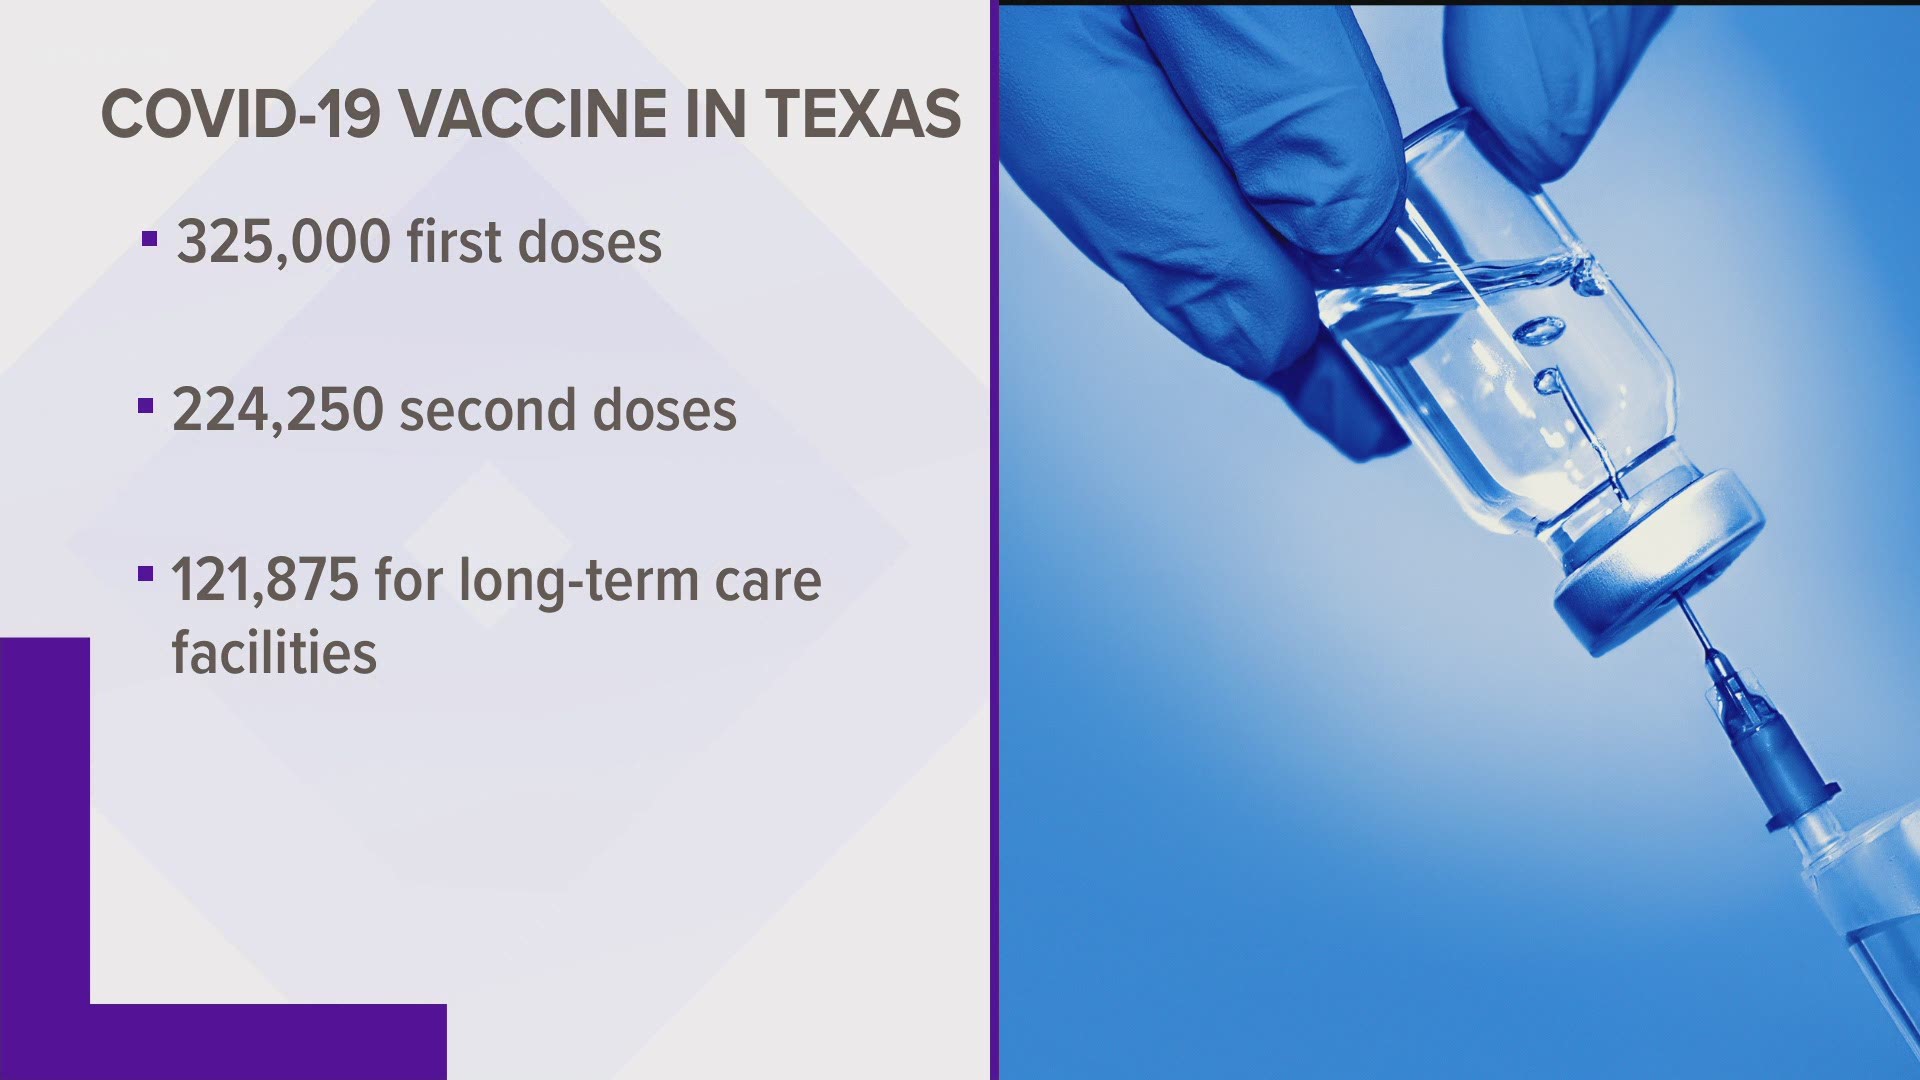 Hundreds of thousands of additional doses of the COVID-19 vaccines are headed to Texas health care providers. The shipments include first doses and second doses.